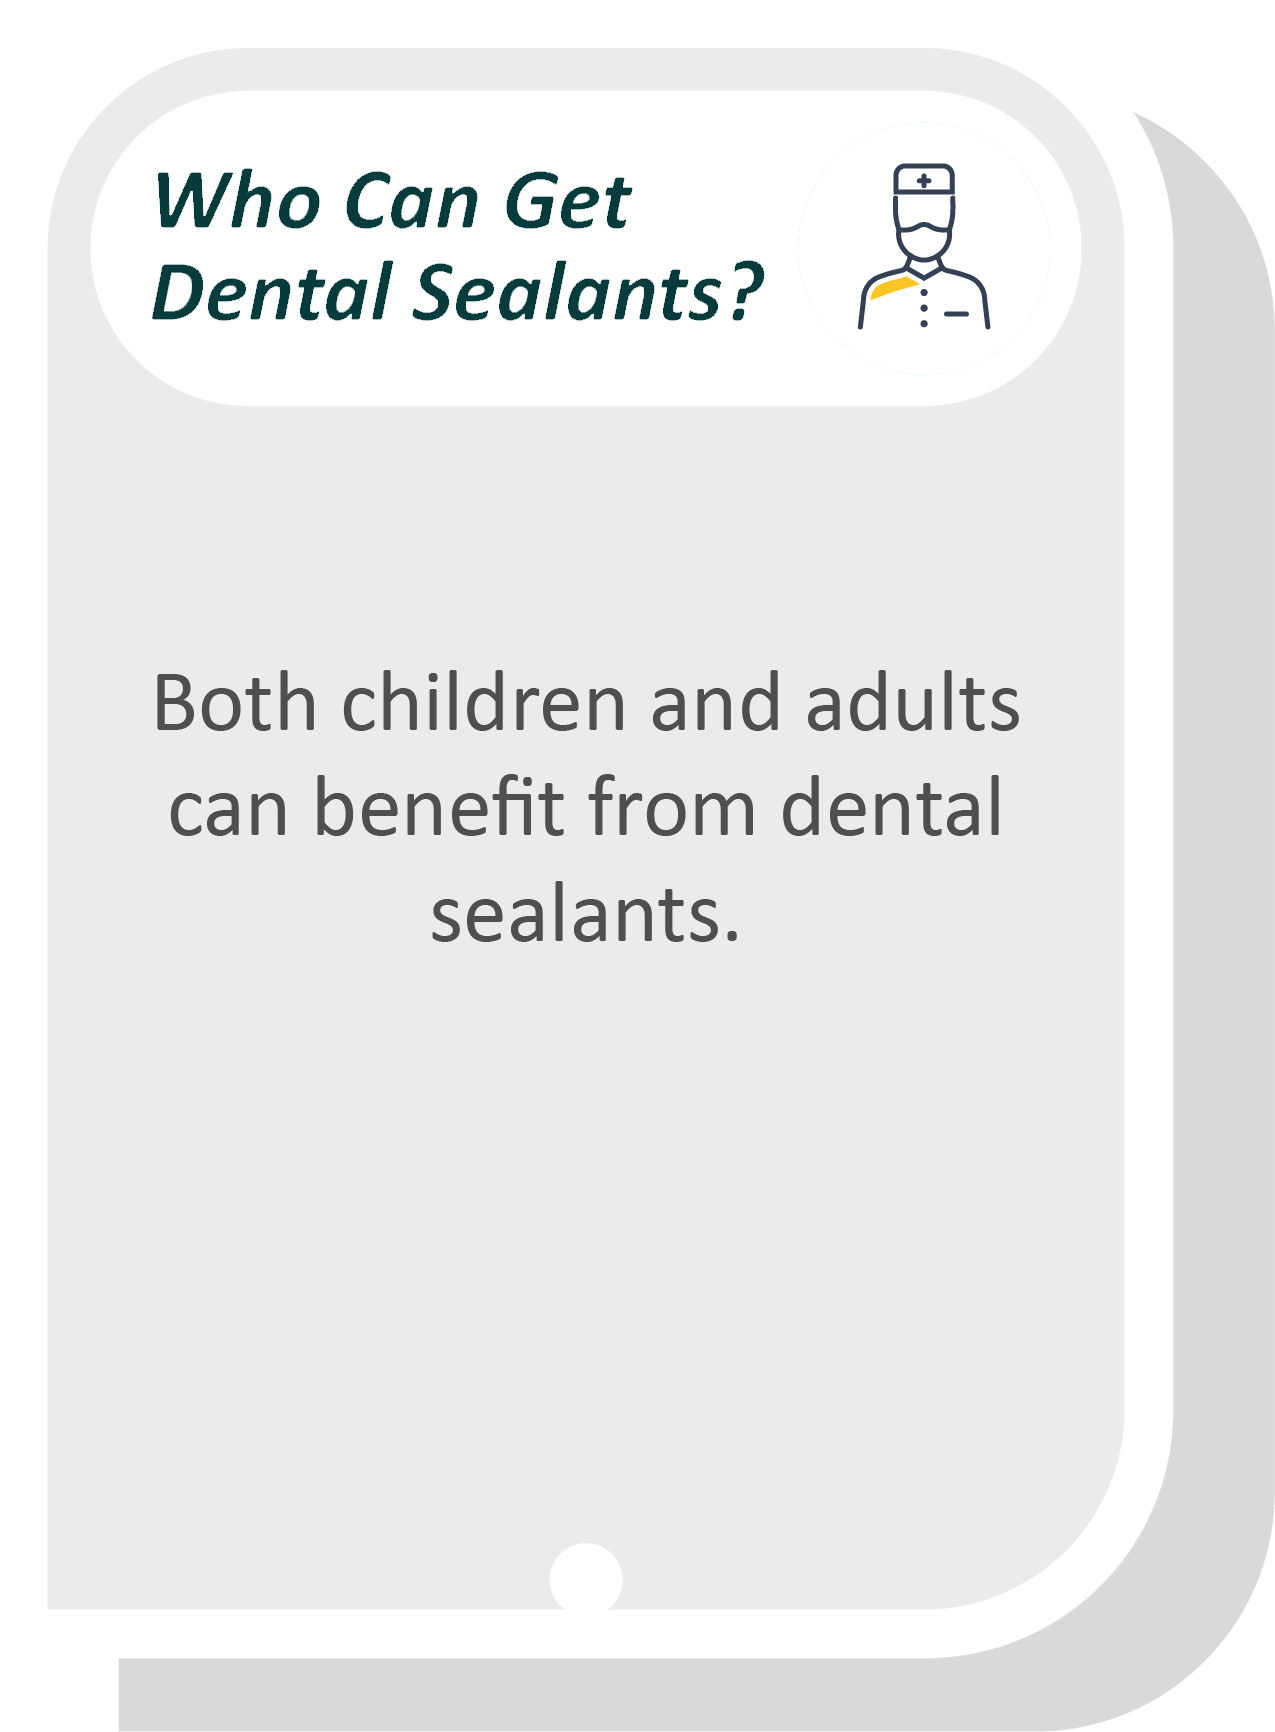 Dental sealants infographic: Both children and adults can benefit from dental sealants.